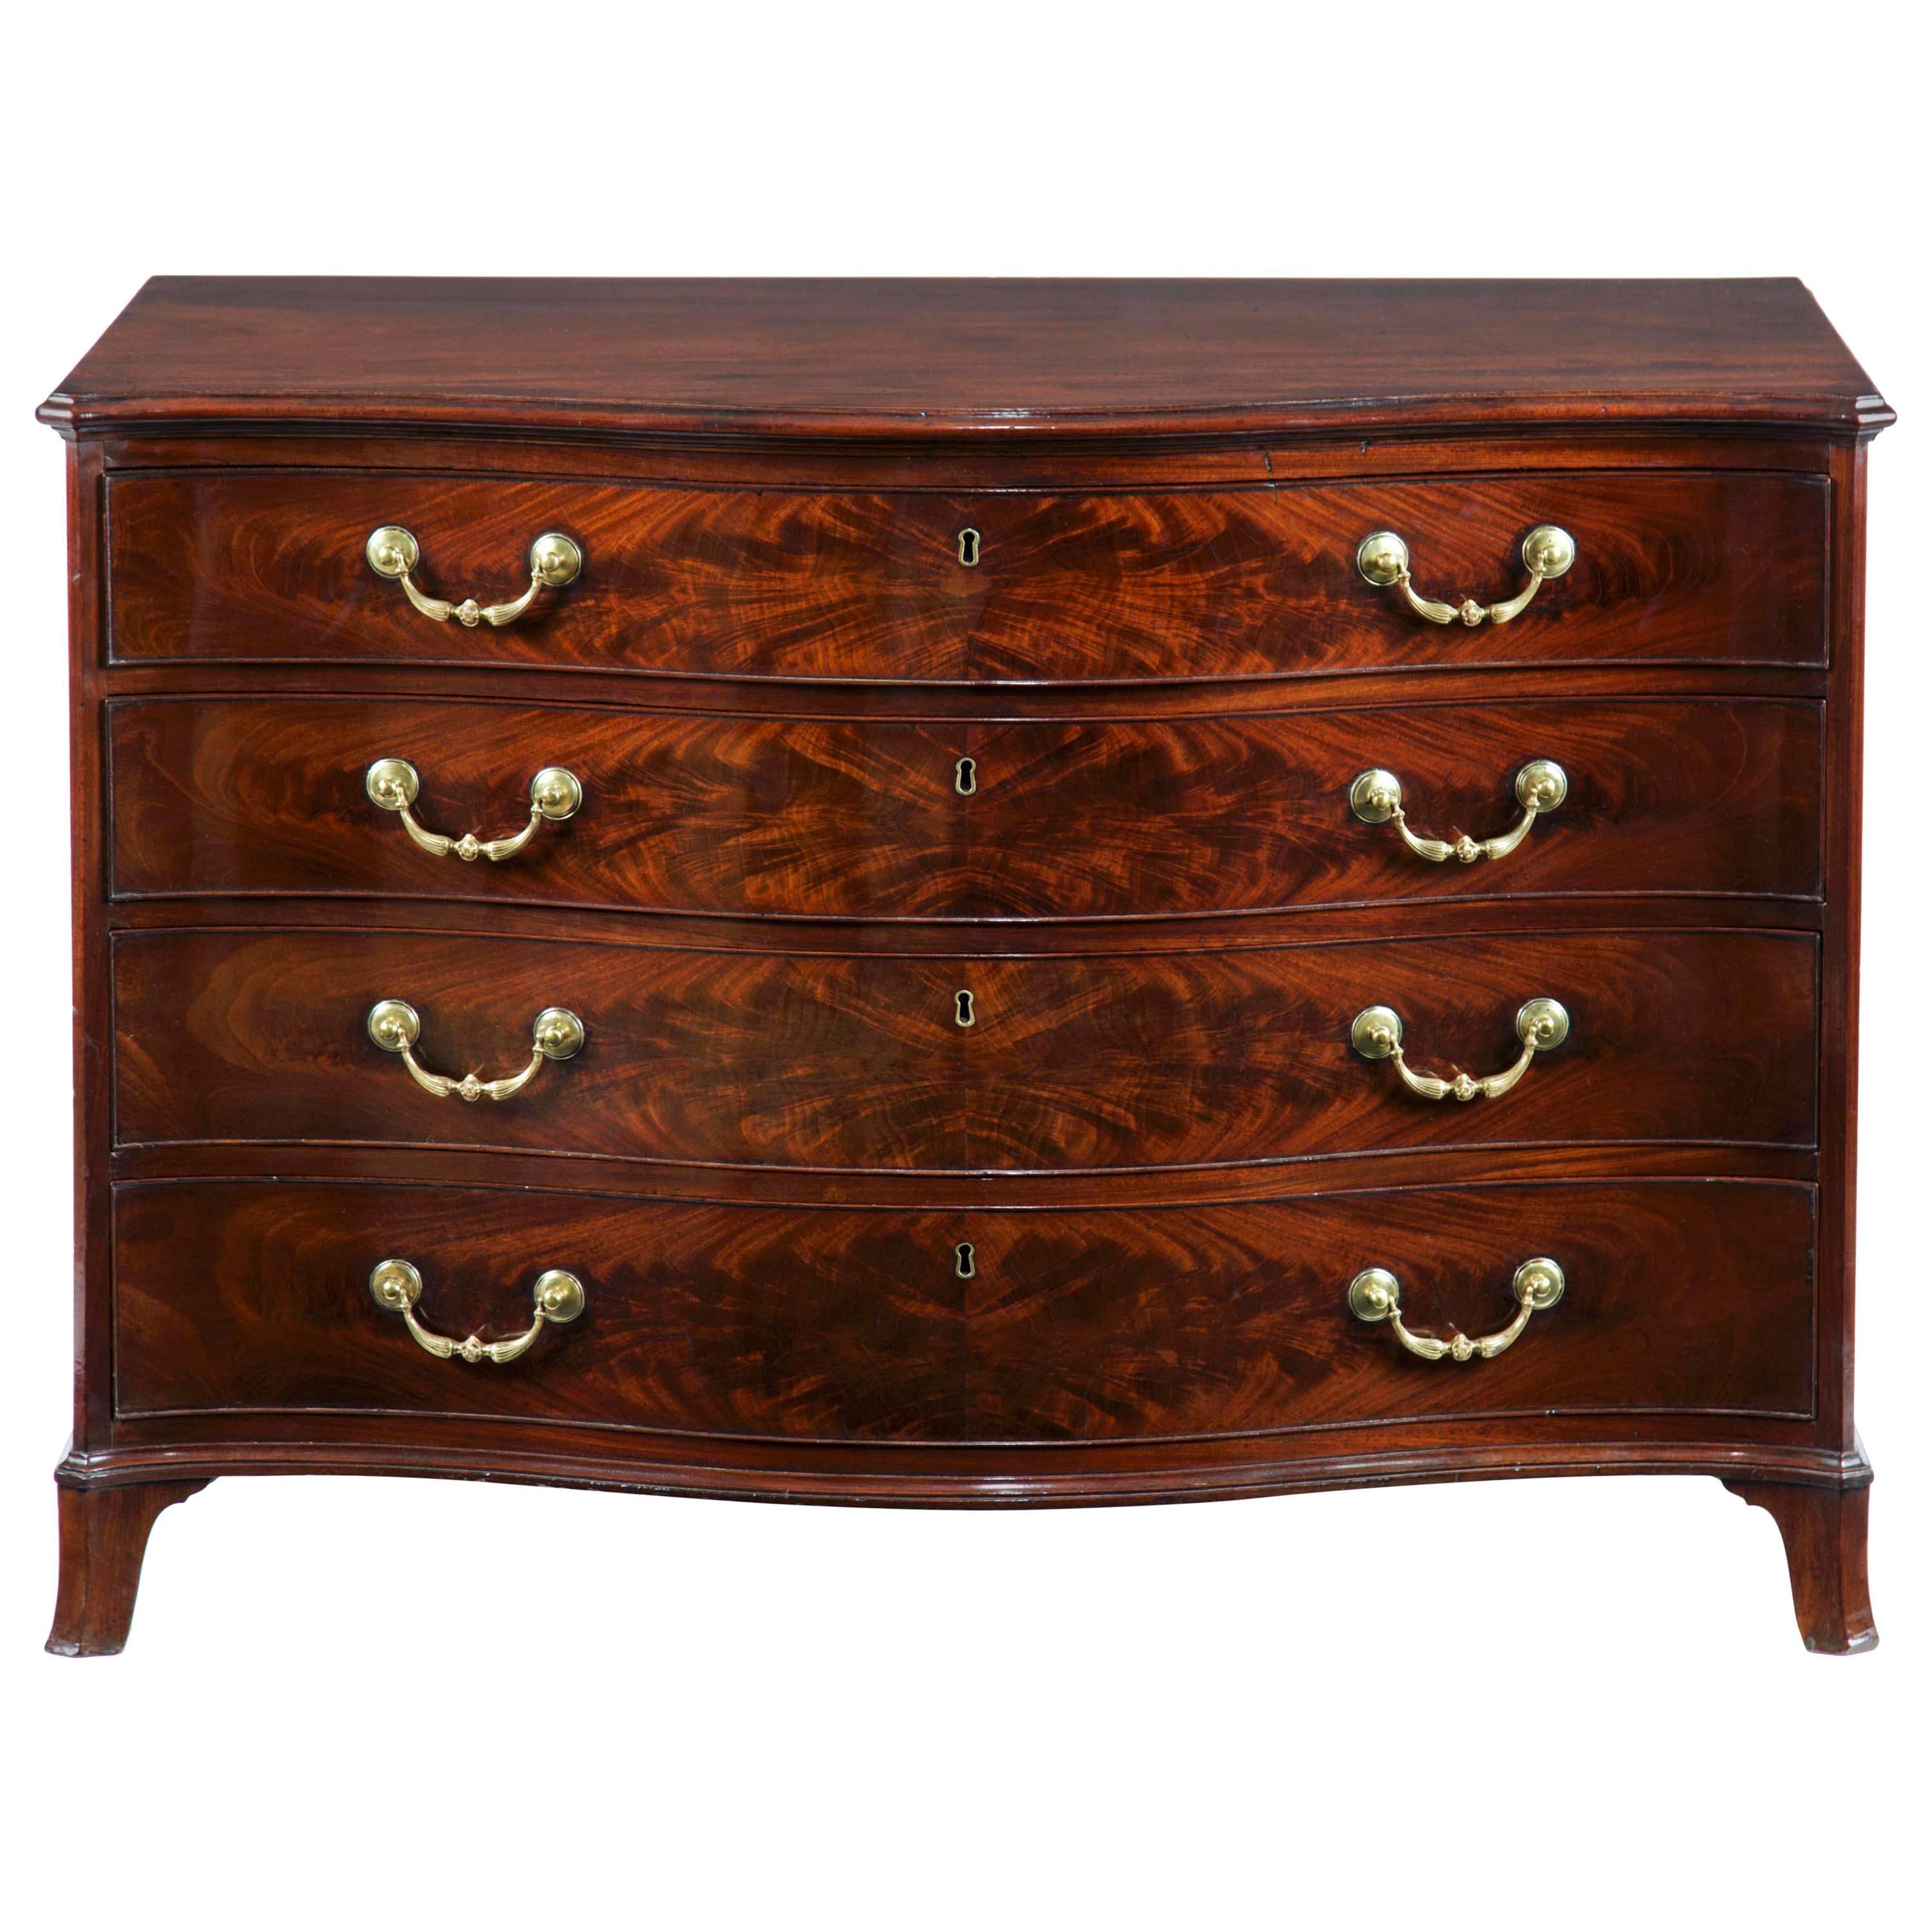 George III Mahogany Serpentine Commode Attributed to Gillows of Lancaster For Sale